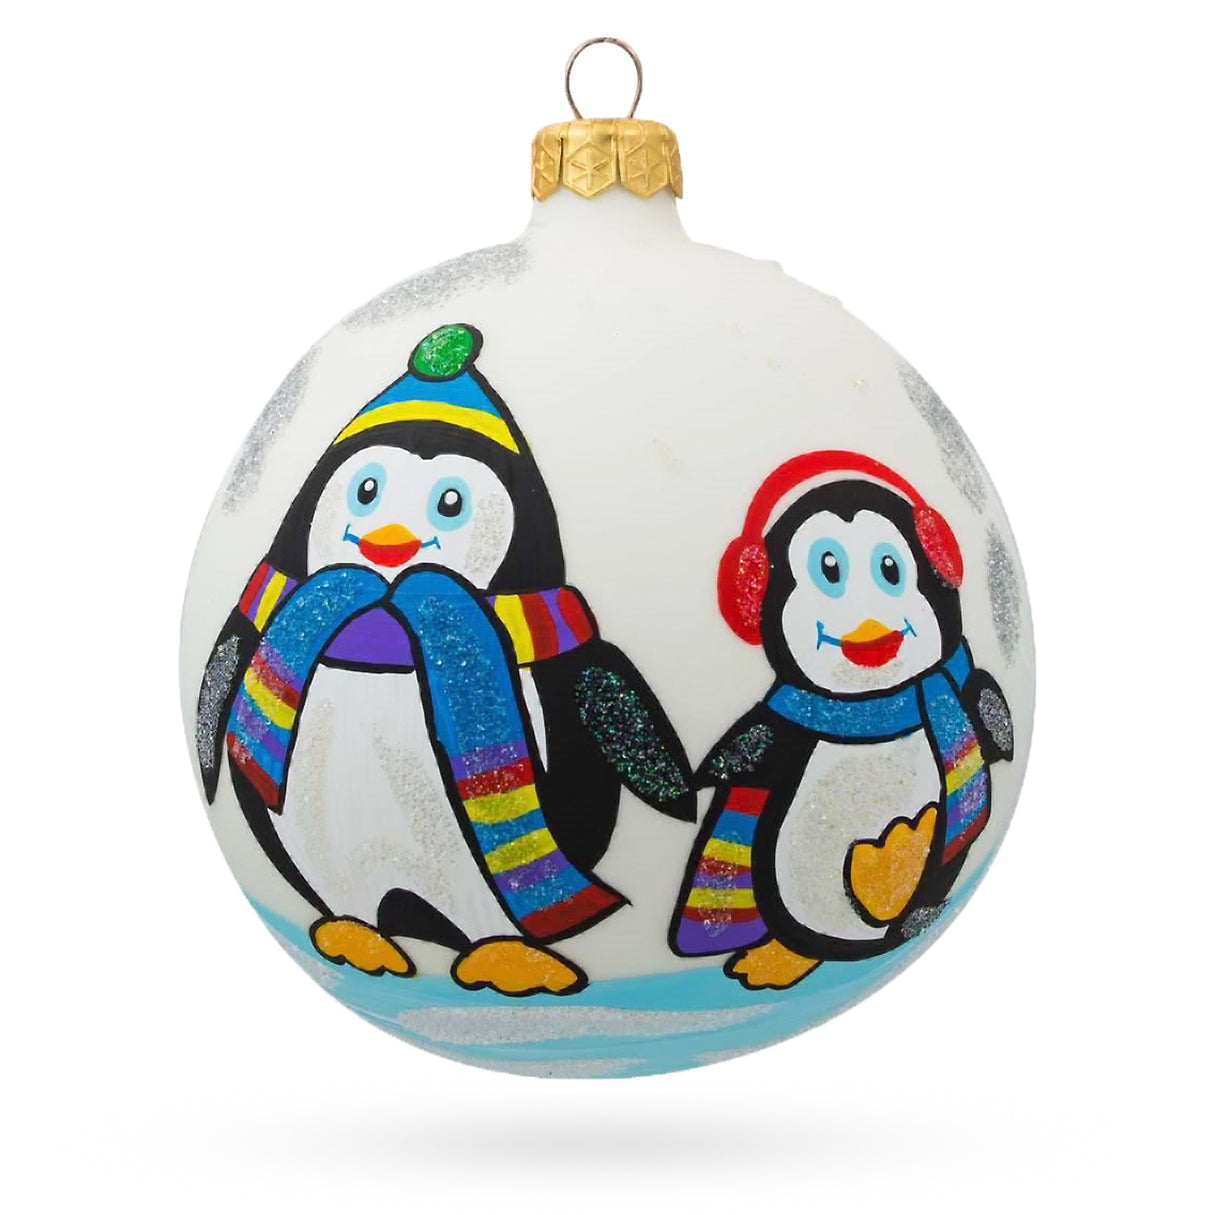 Lovebirds on Ice: Two Penguins Blown Glass Ball Christmas Ornament 4 Inches in Multi color, Round shape